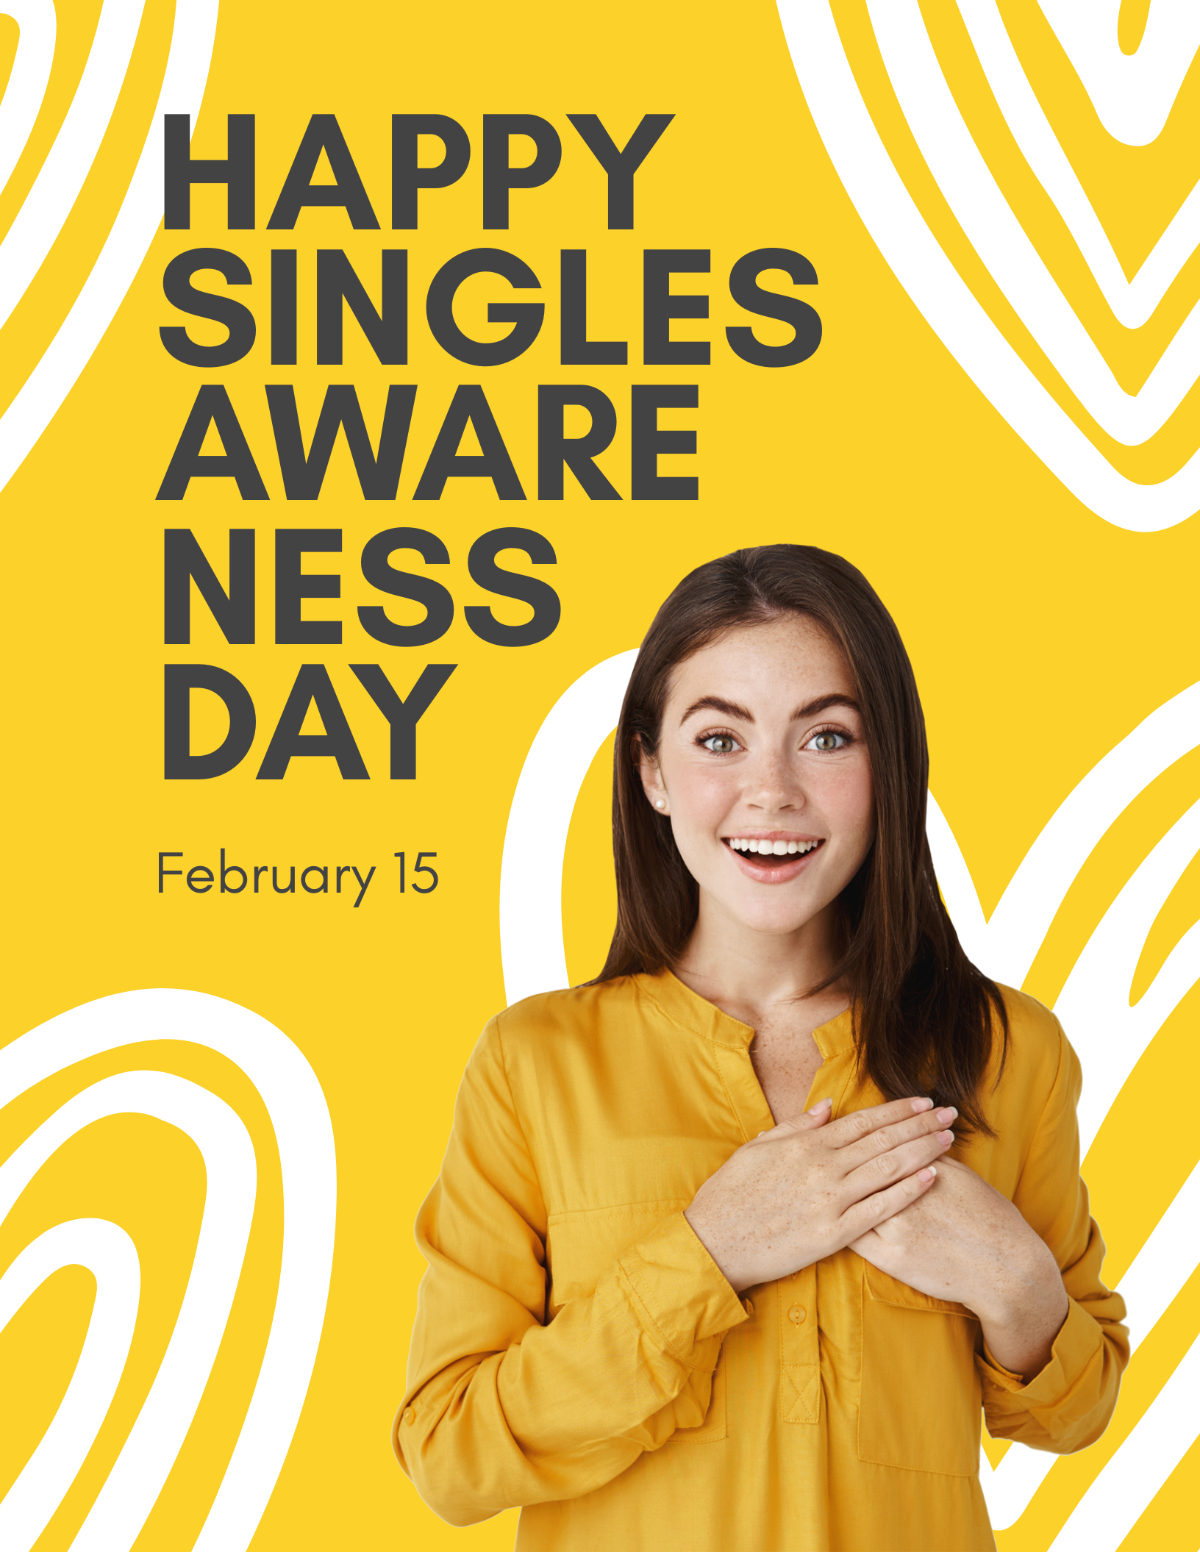 Happy Singles Awareness Day Flyer Template